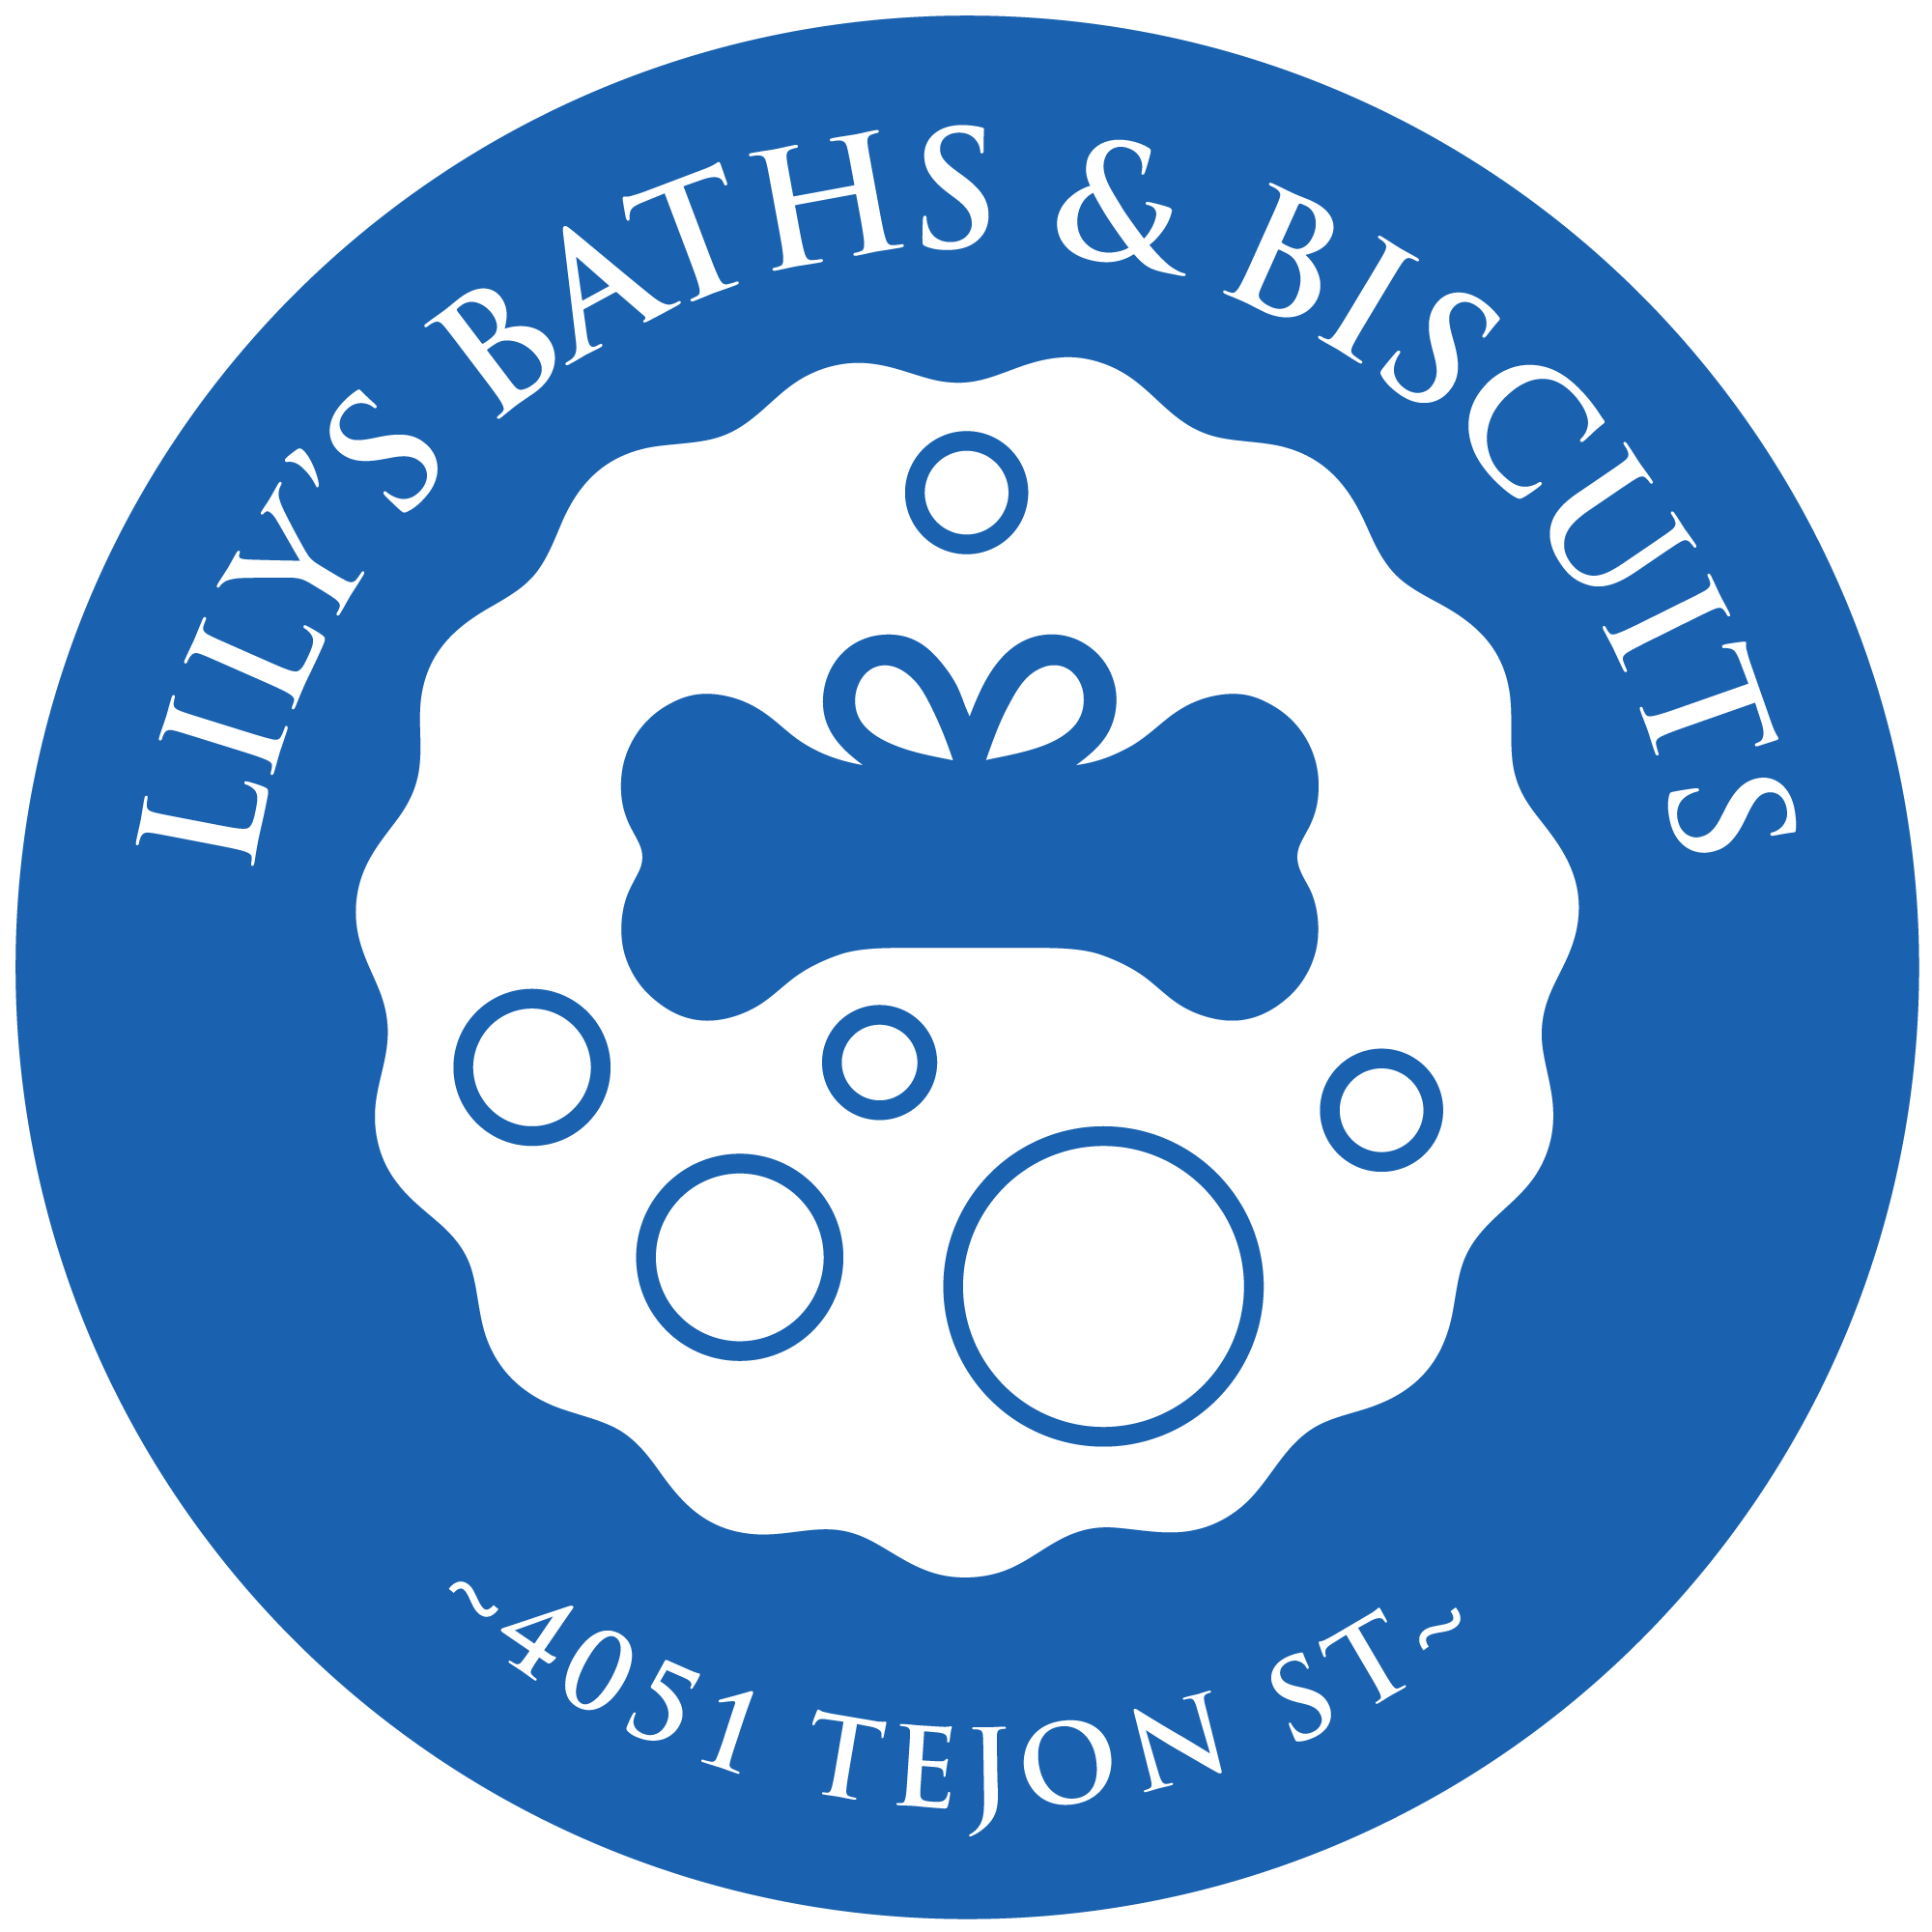 Company logo of Lily's Baths & Biscuits